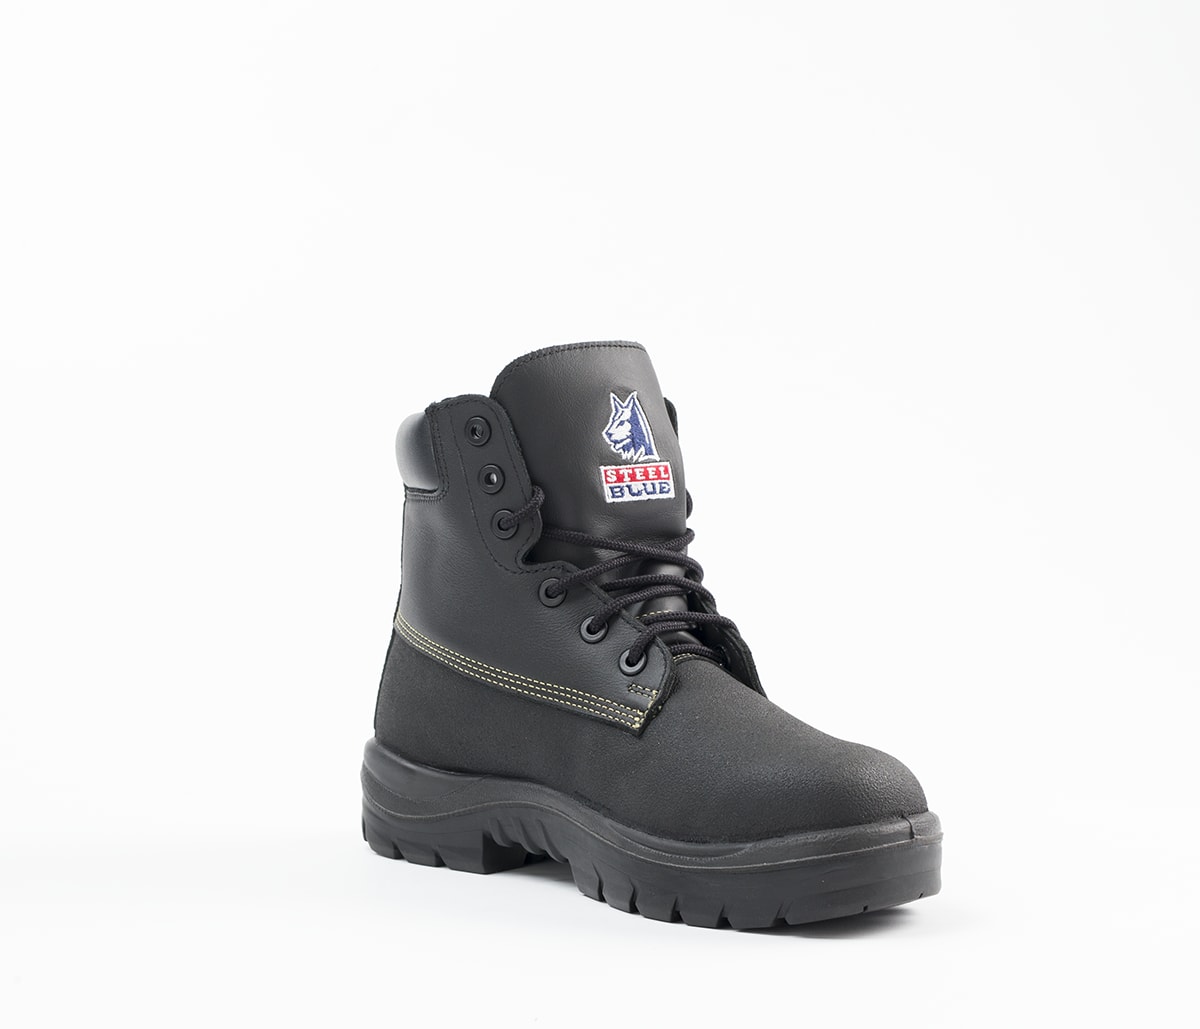 chemical resistant boots uk